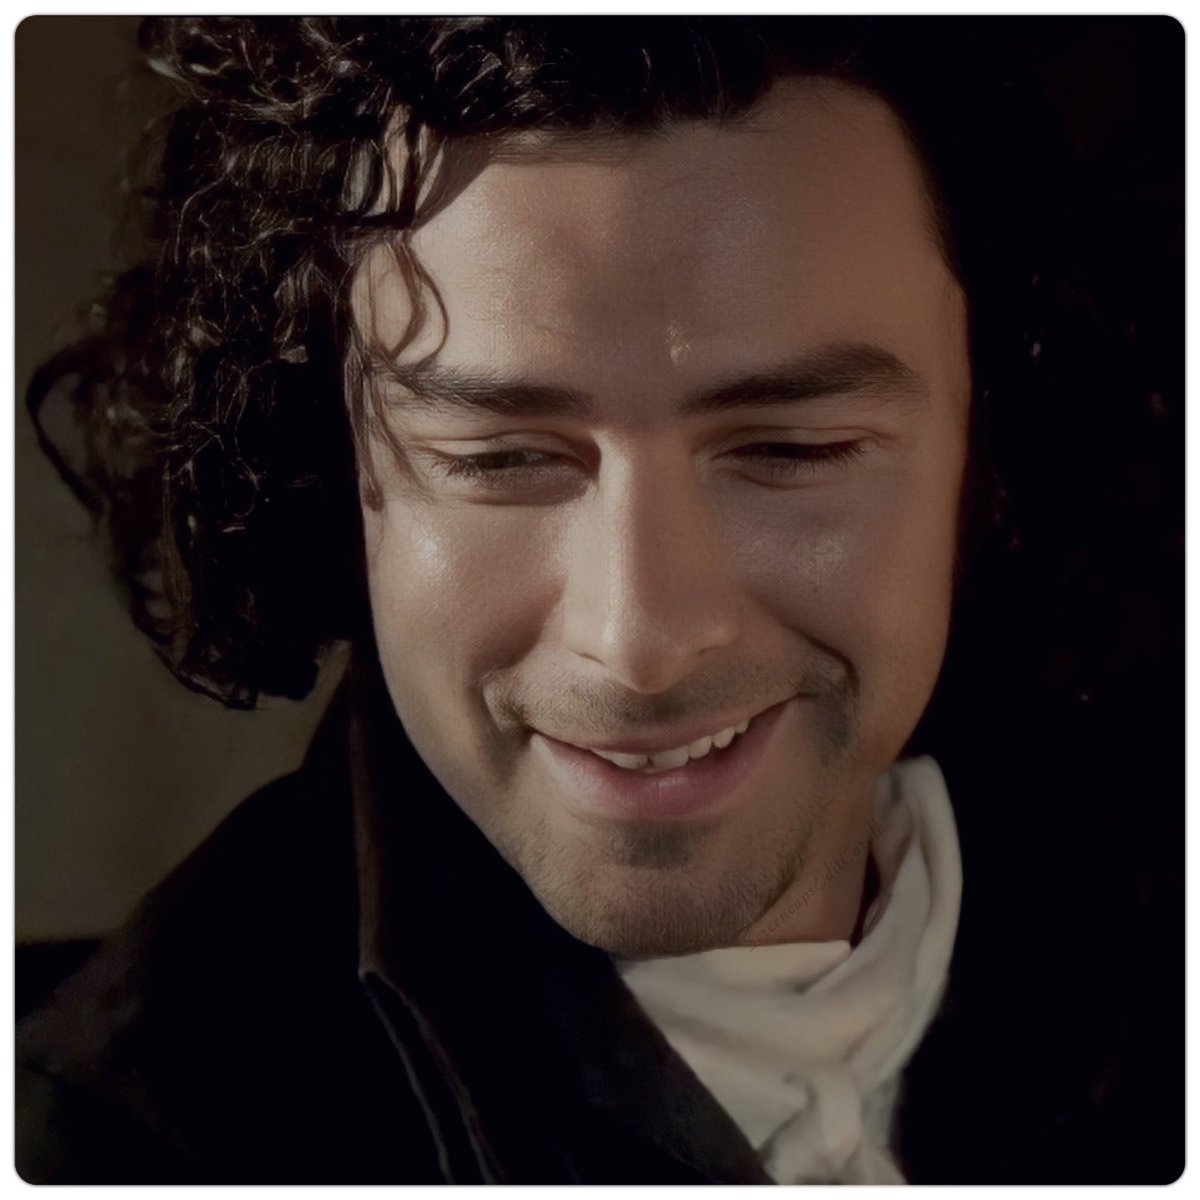 It’s not often we see #RossPoldark #smile but managed to find a couple in the #archives..🥰..#Poldark #AidanTurner has the #bestsmile #ever! #WorldSmileDay #AidanCrew 😍😍😍